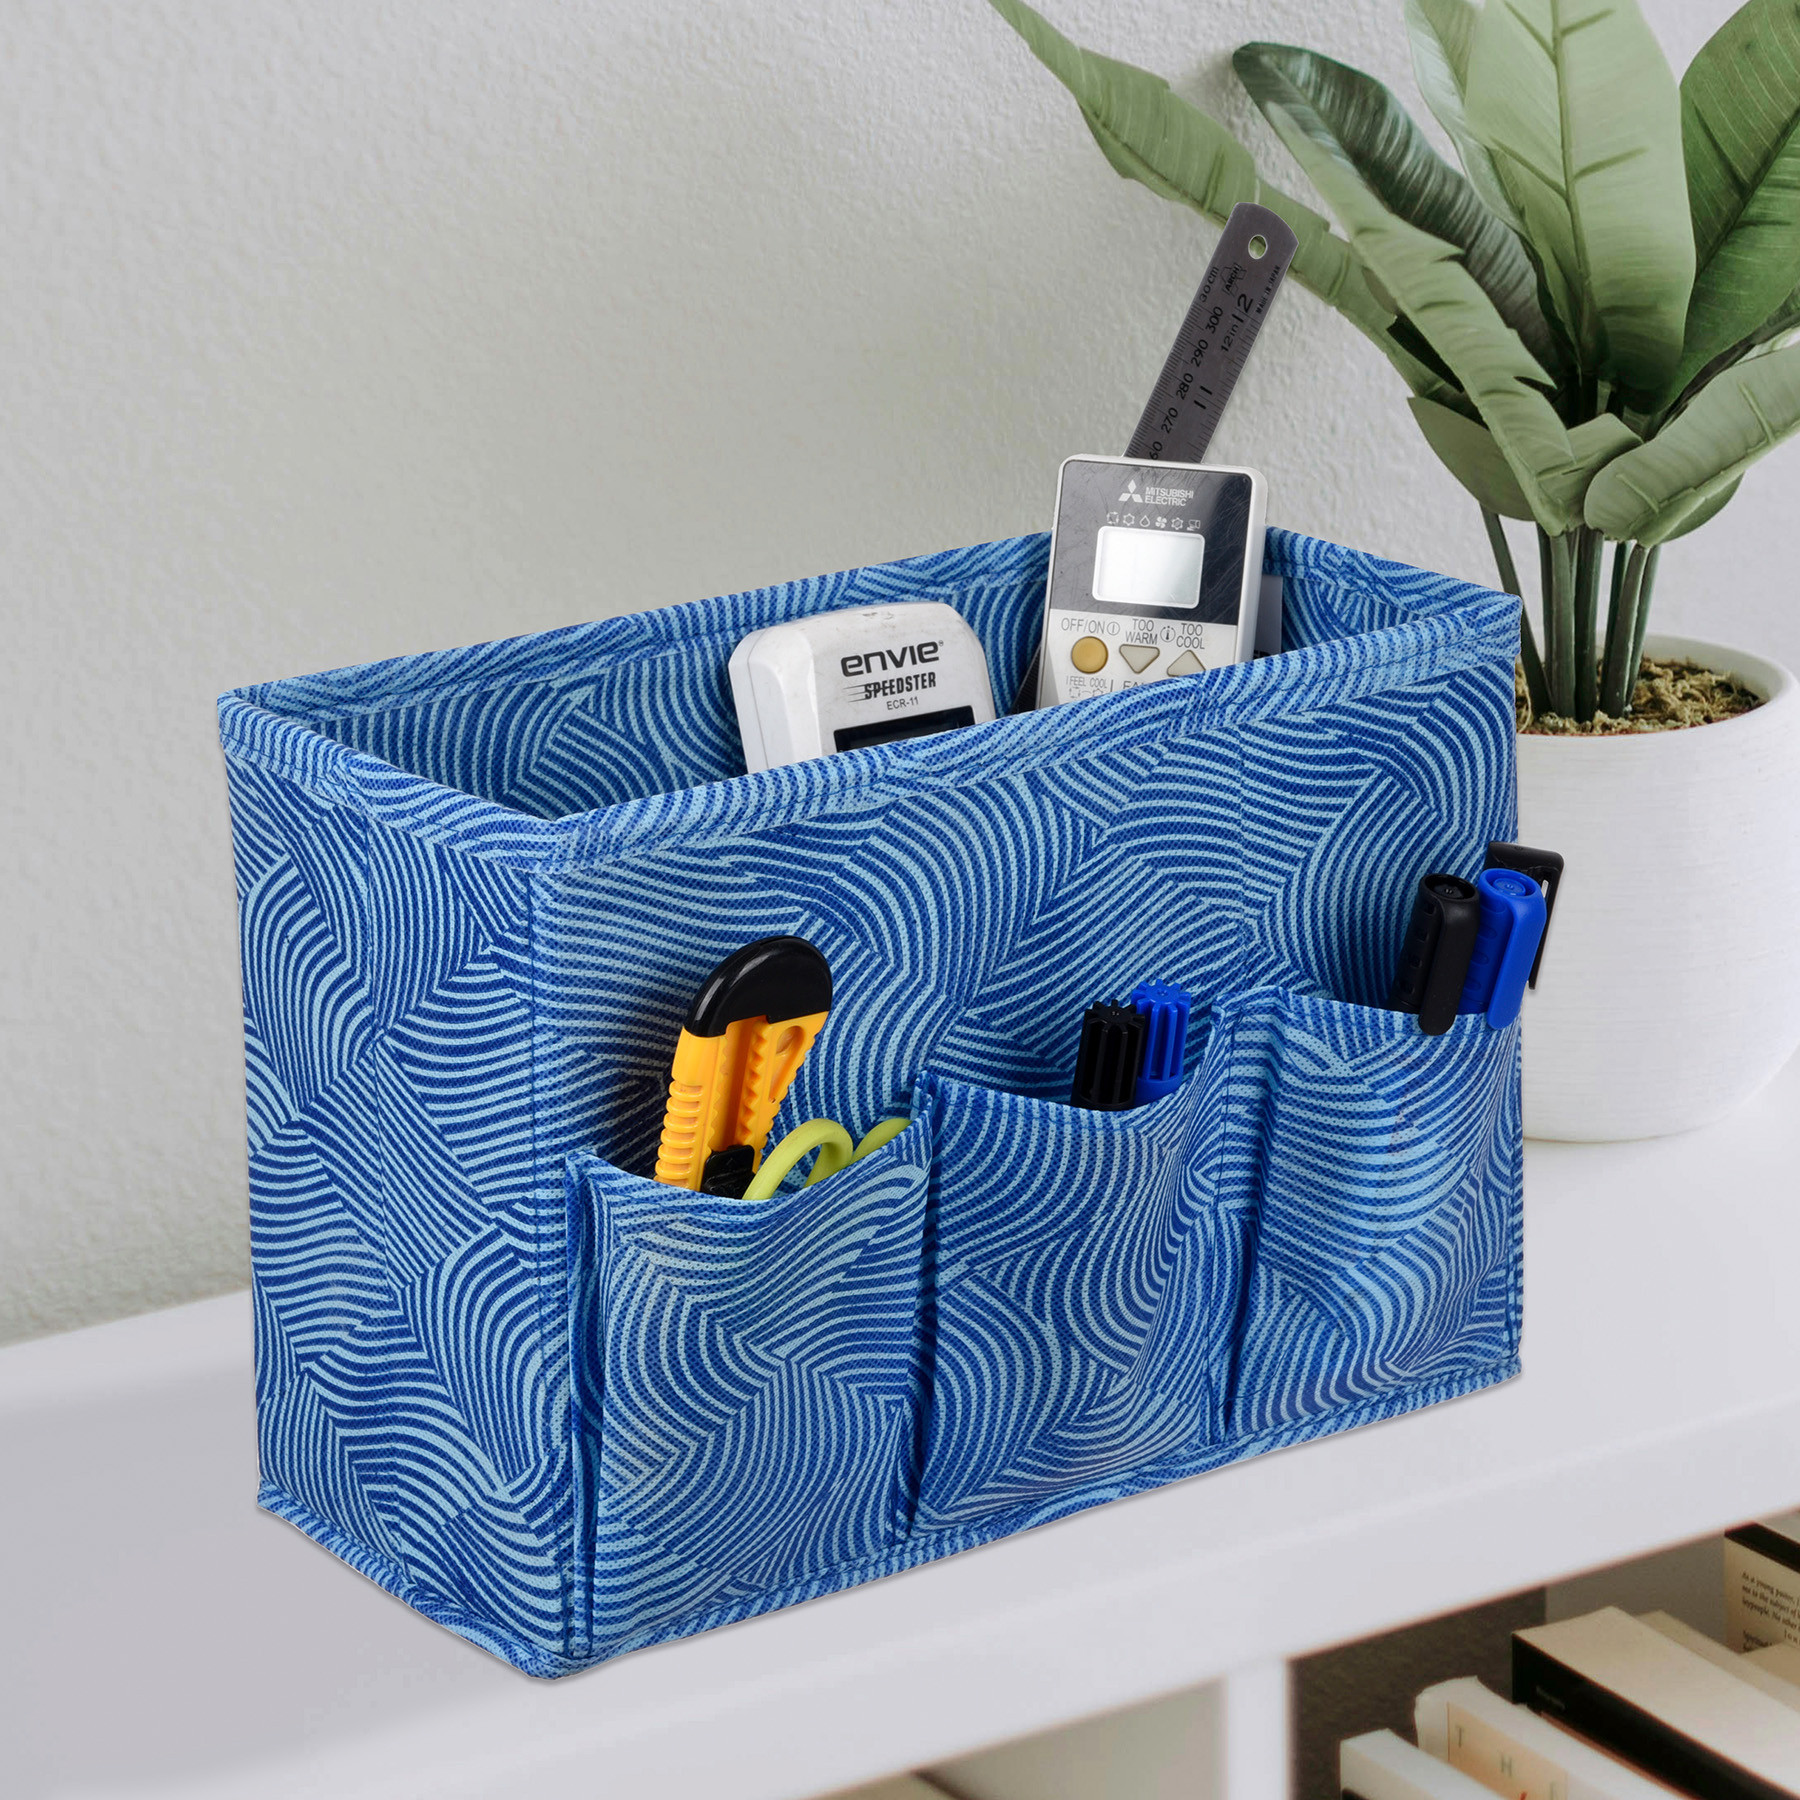 Kuber Industries Stationary Box | Non-Woven Files Organizer for Office | Desk Organizer | Stationary Organizer for Kids Room with 3 Compartment | Zig Zag Storage Box | Small | Blue